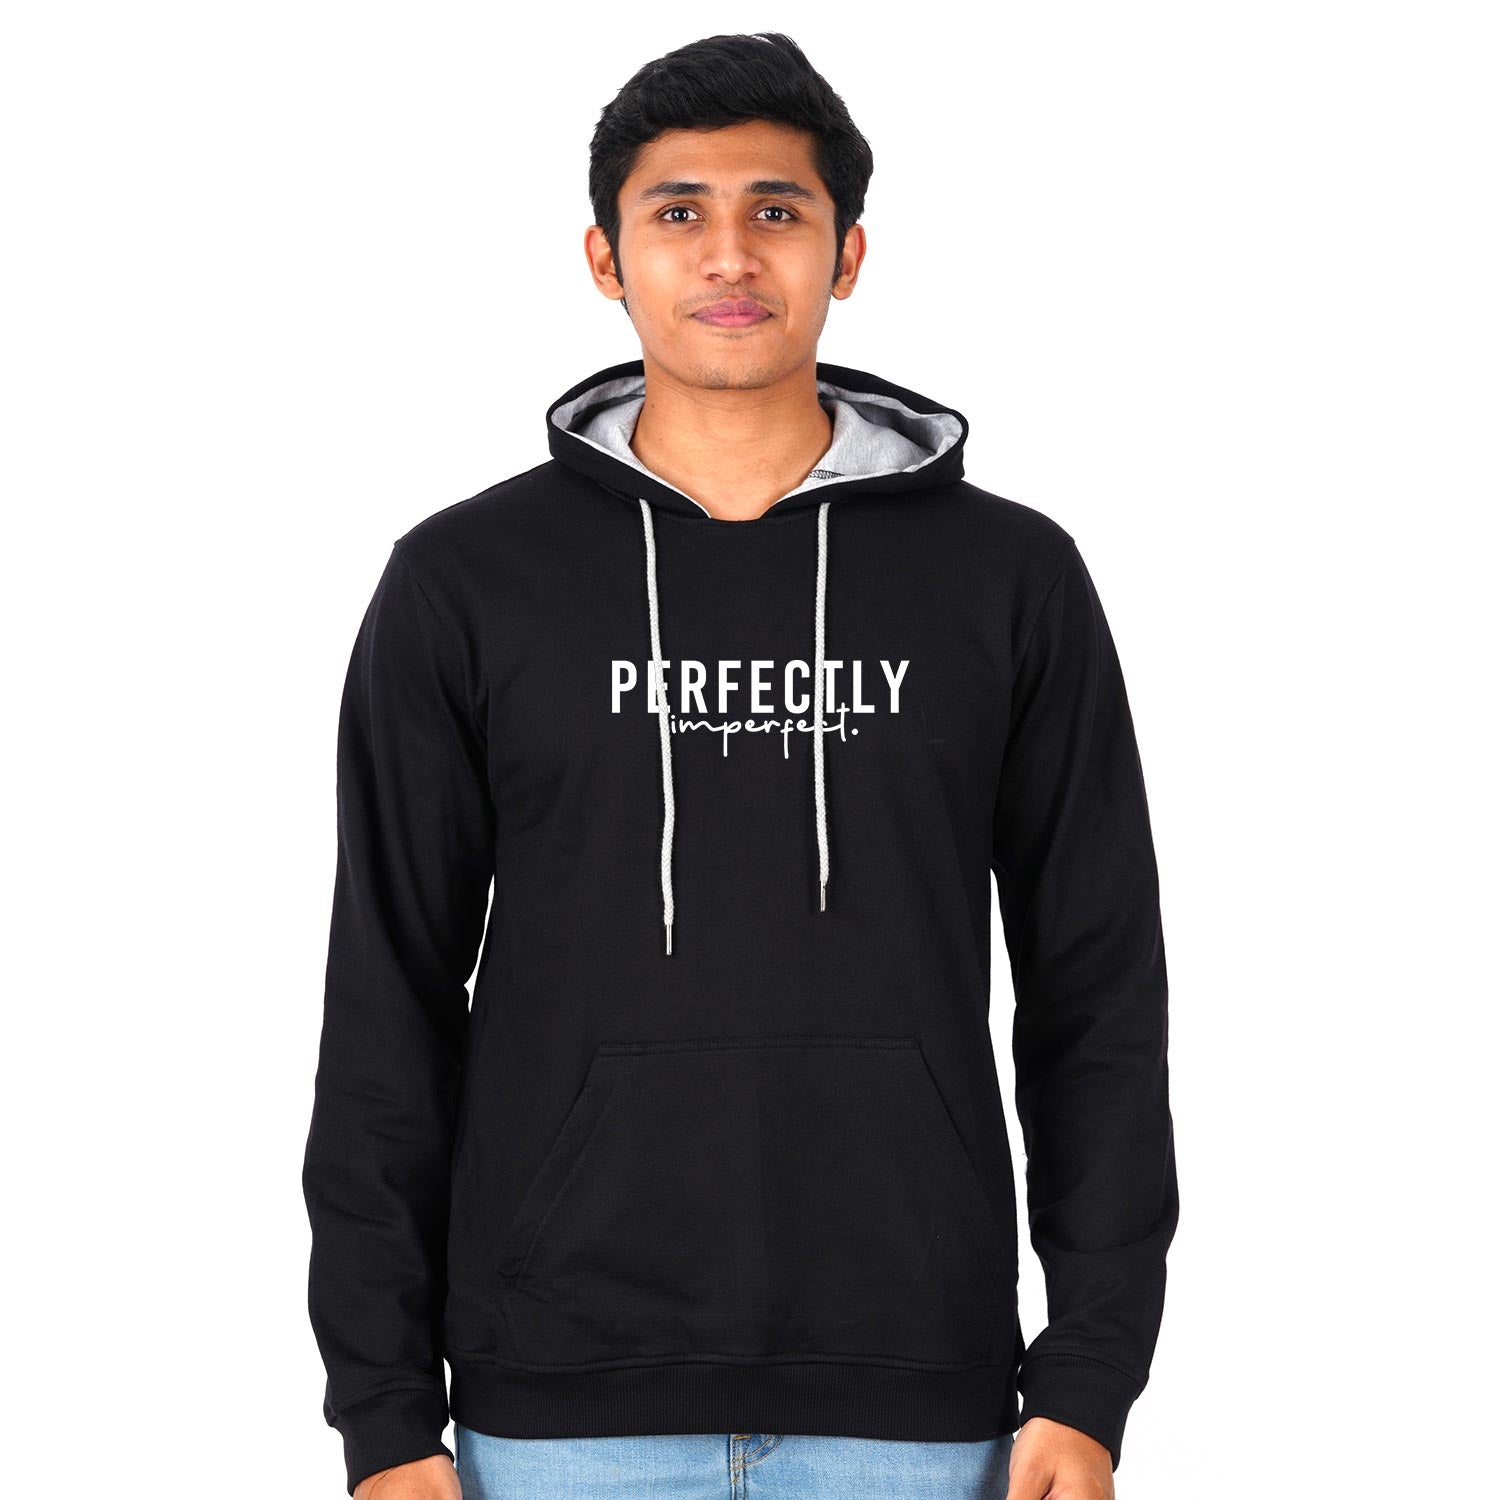 Perfectly Imperfect Hoodie - DudeMe - Dudeme